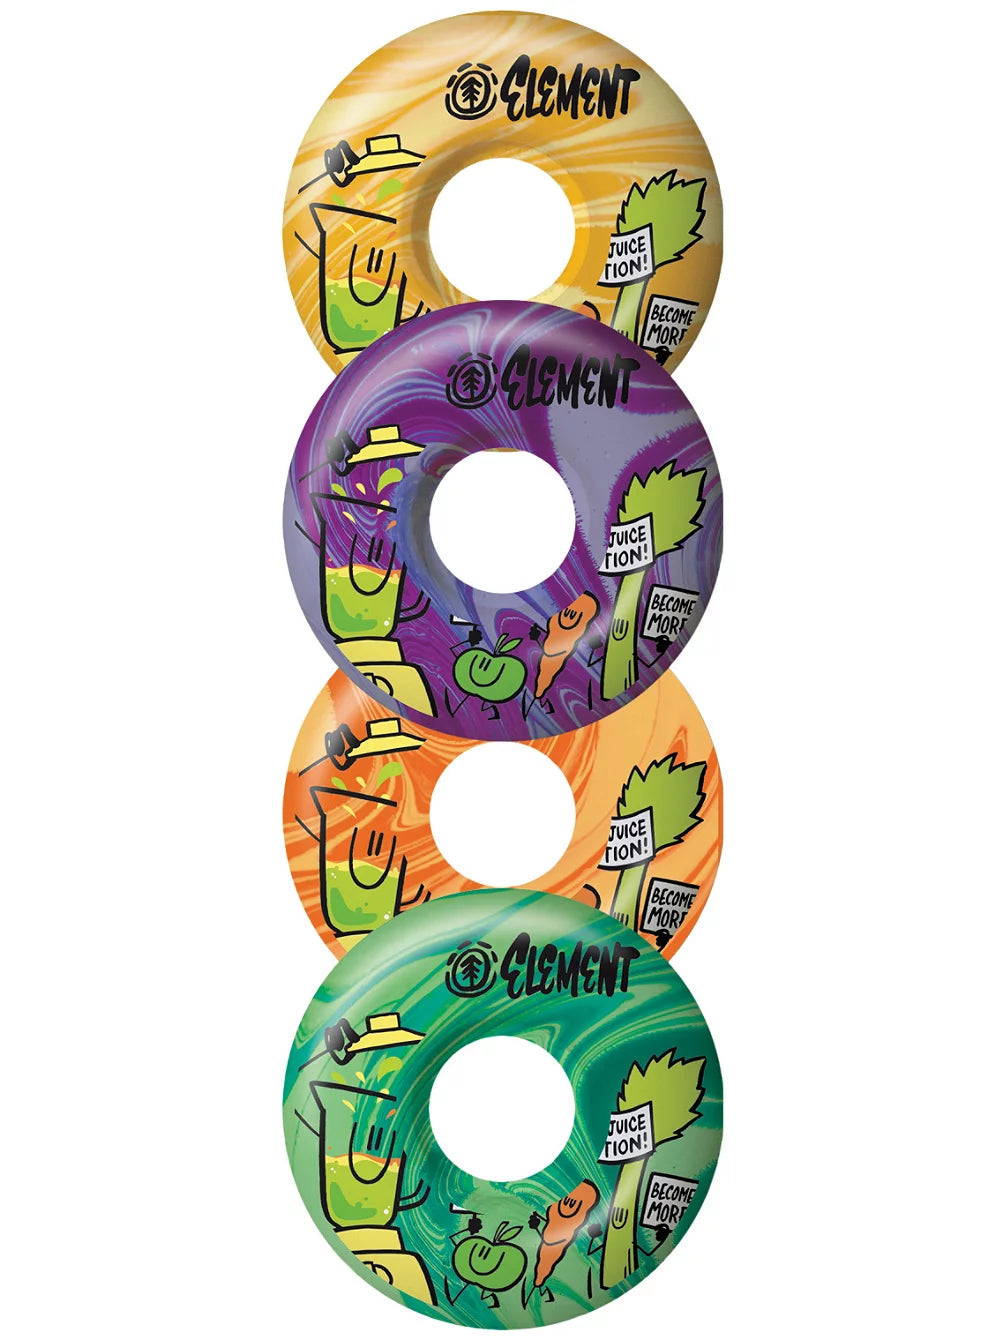 Element brand smoothies set of 4 different color wheels for skateboard yellow purple orange green